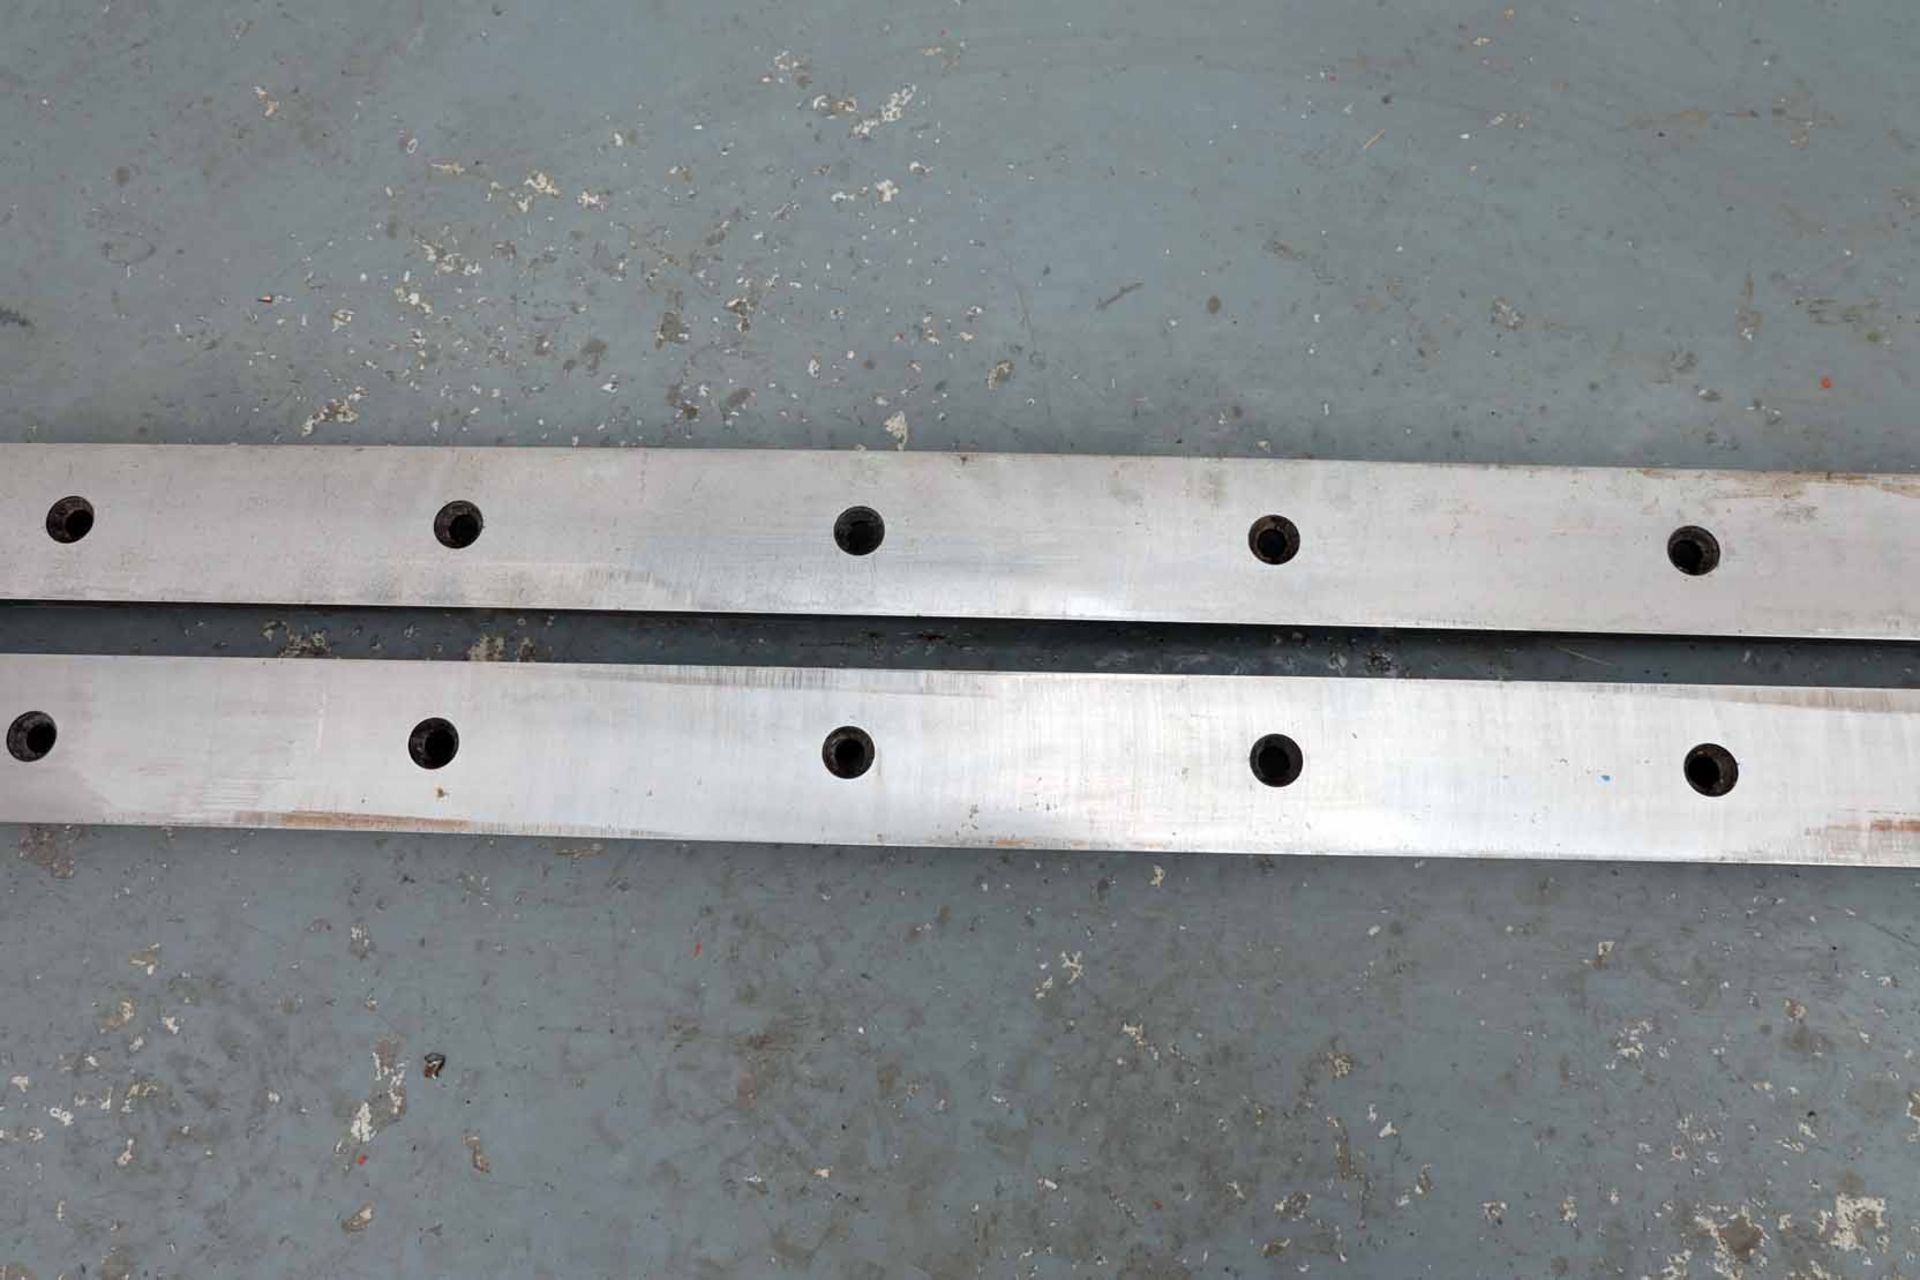 Pair of Guillotine Blades. Length 2542mm. Dimensions 62mm x 14mm. 17 Holes Counter Sunk Both Sides. - Image 3 of 6